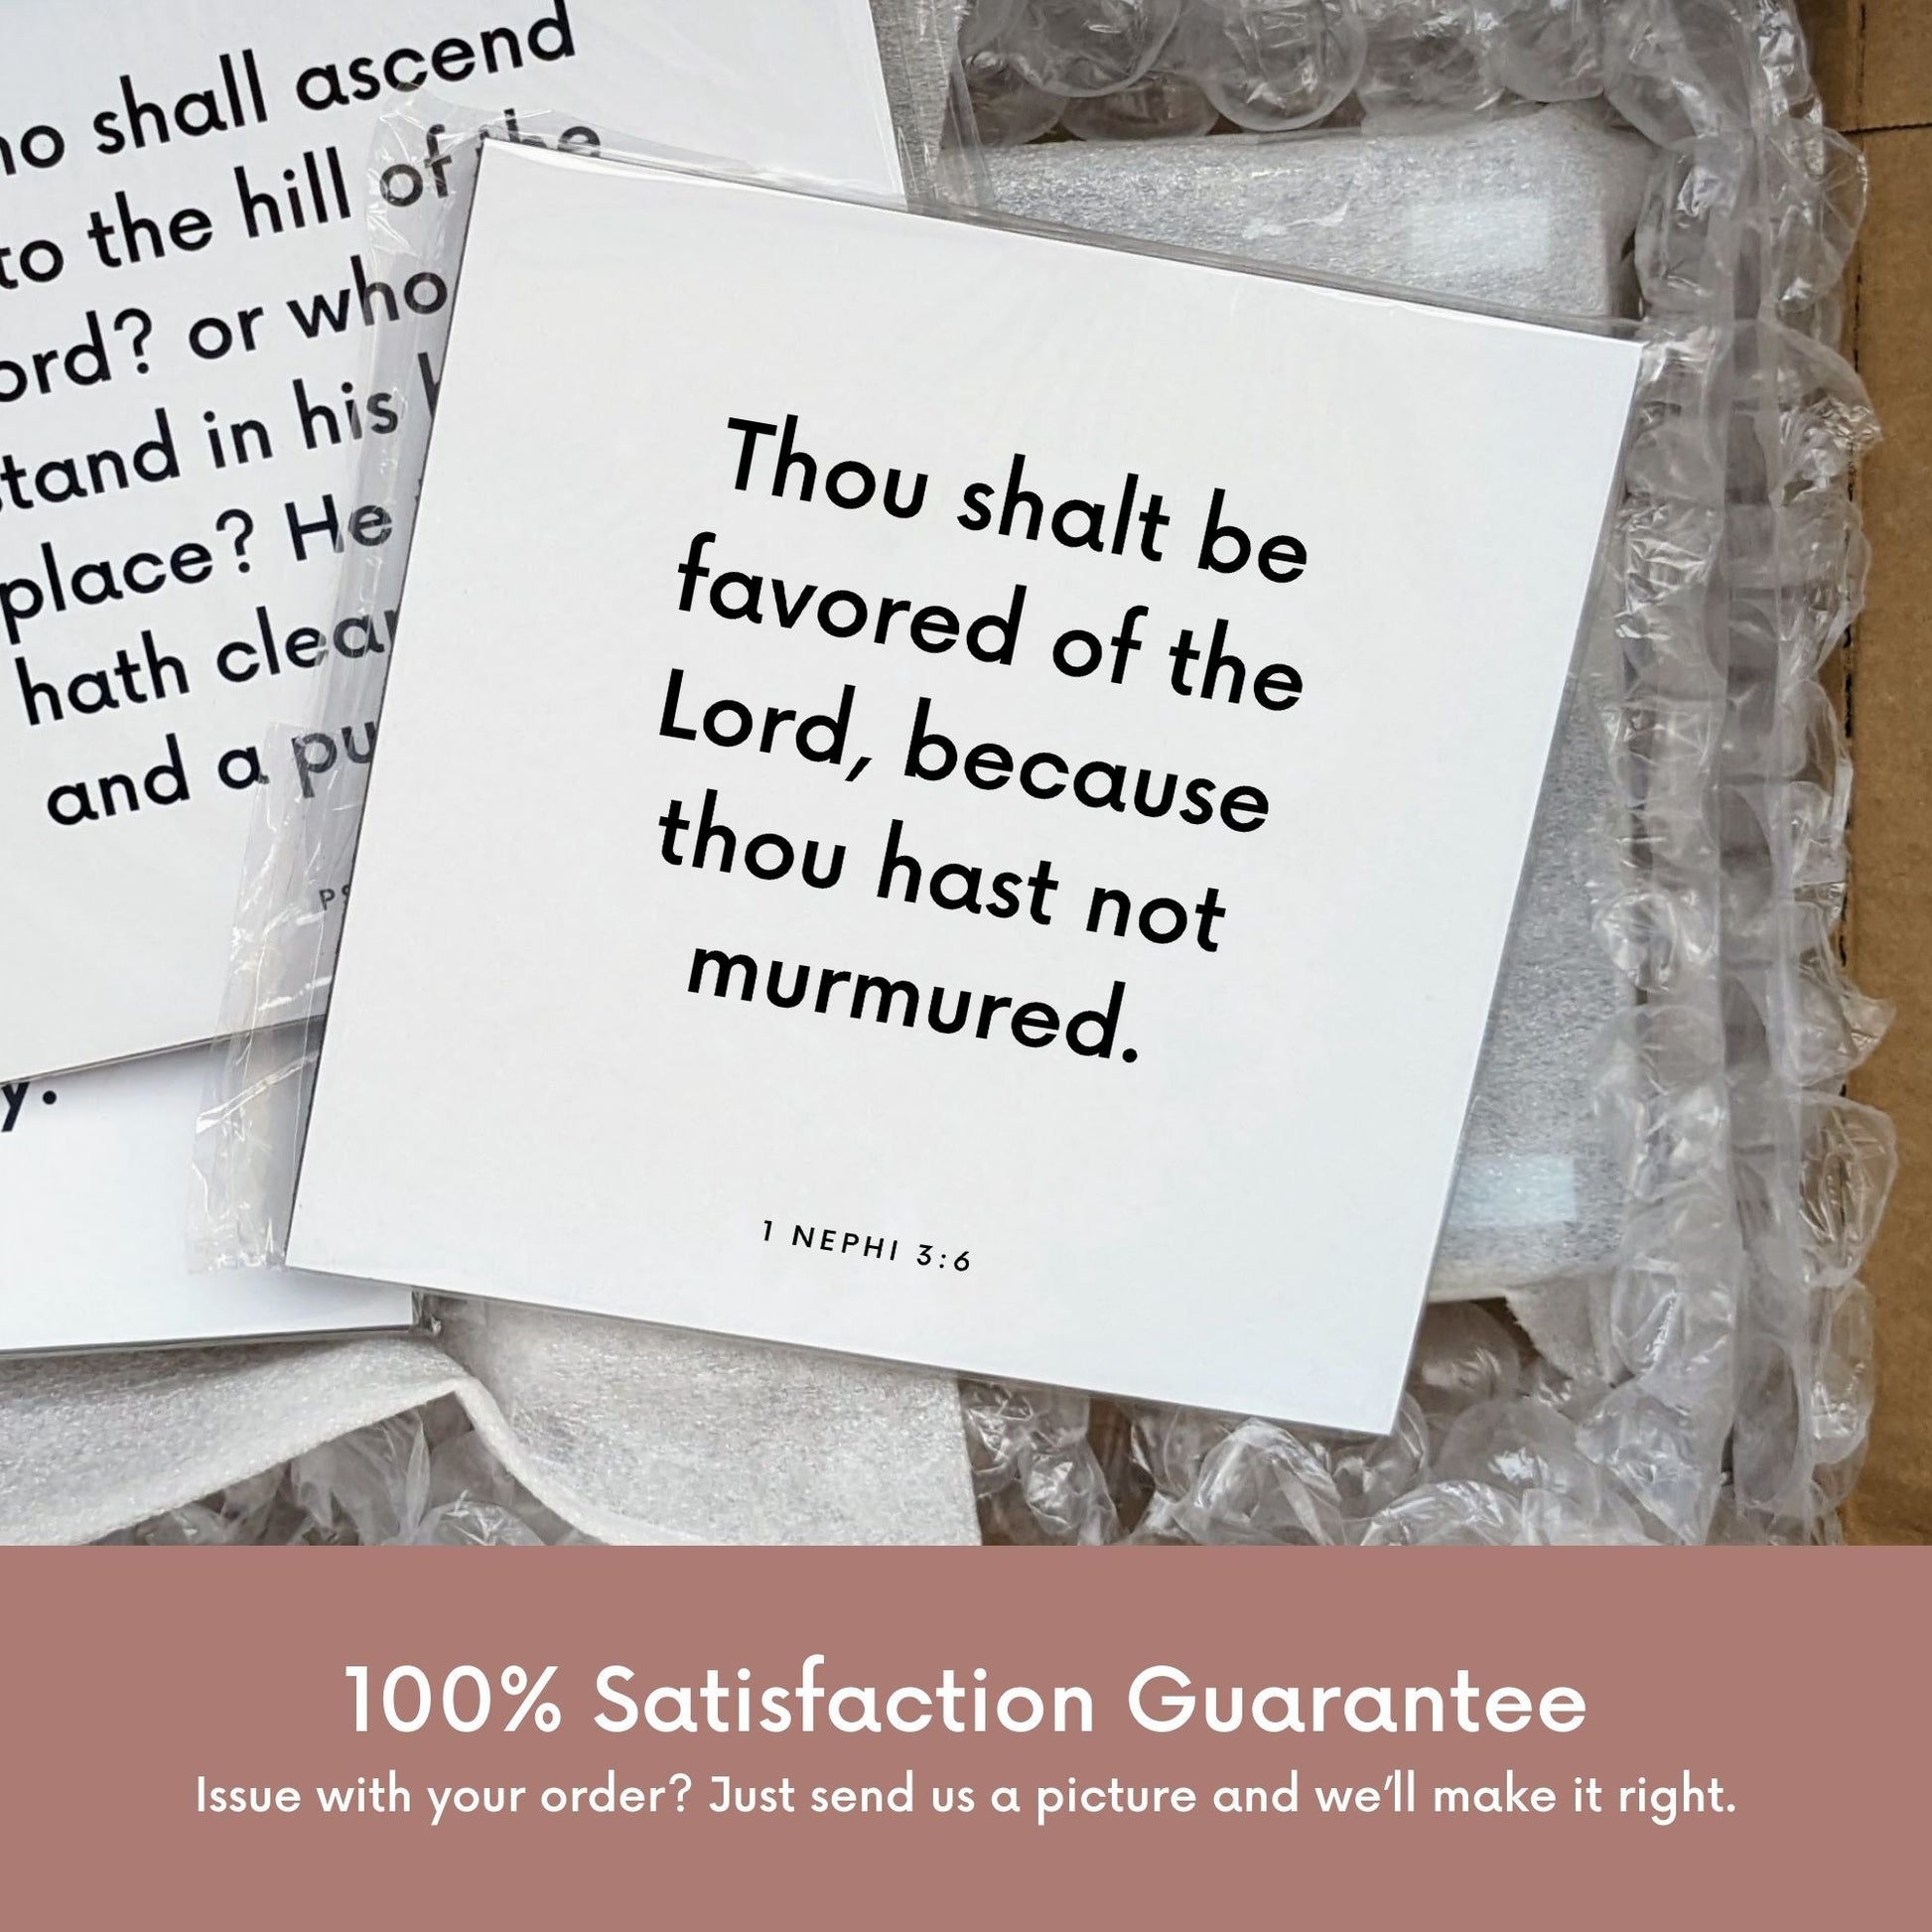 Shipping materials for scripture tile of 1 Nephi 3:6 - "Thou shalt be favored of the Lord"